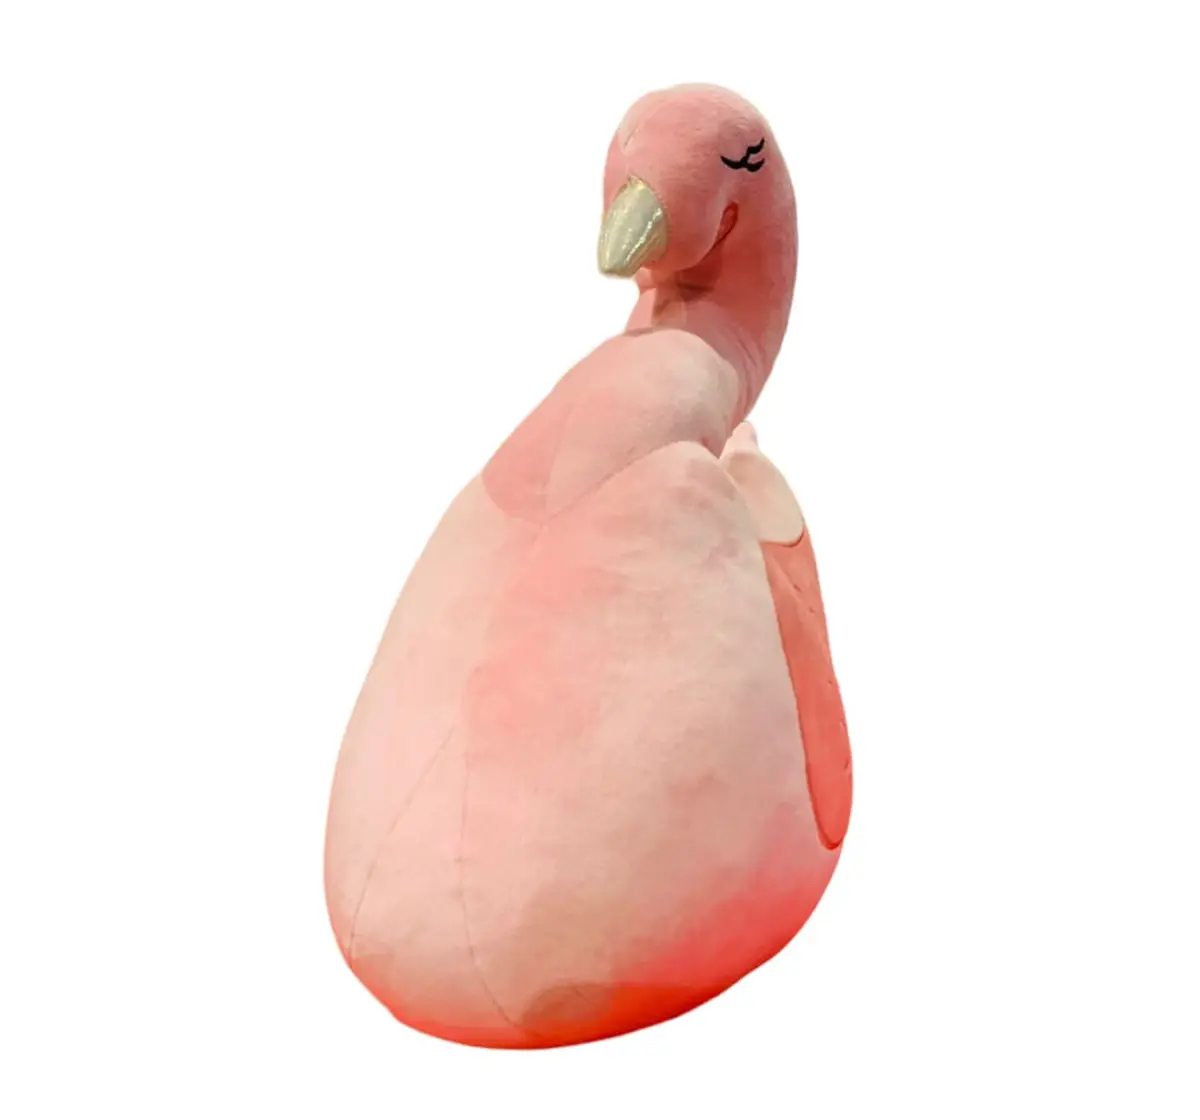 Huggable Cuddly Swan By Fuzzbuzz Stuffed Toy, Soft Toys For Kids, Cute Plushies, 40 Cm, Pink, 0M+